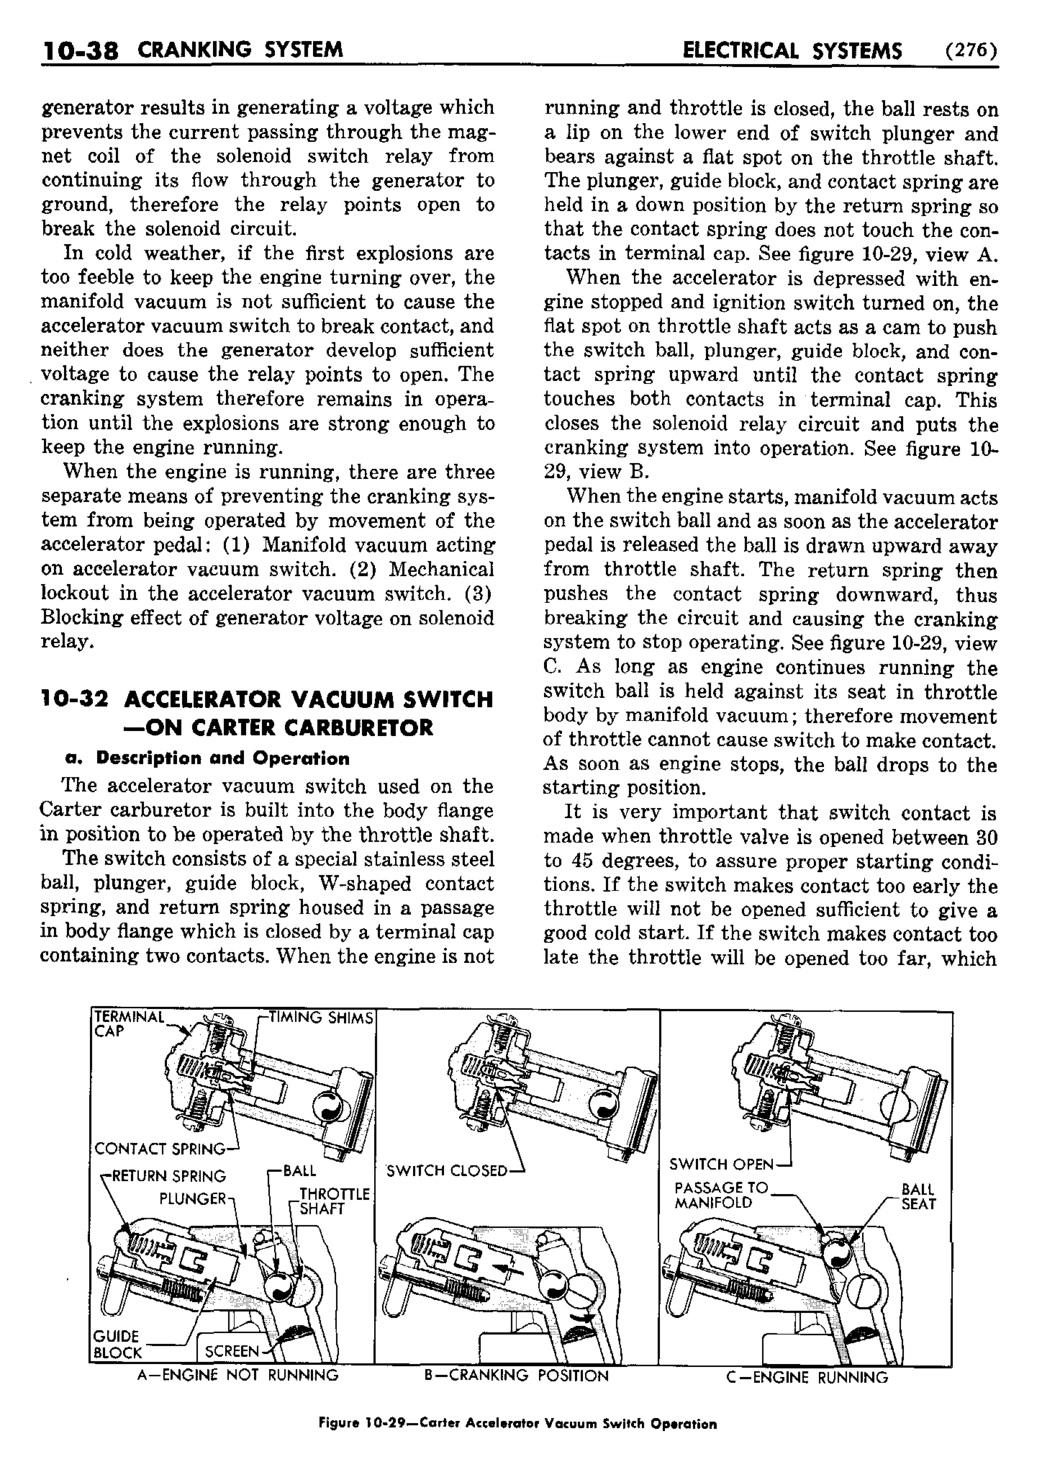 n_11 1950 Buick Shop Manual - Electrical Systems-038-038.jpg